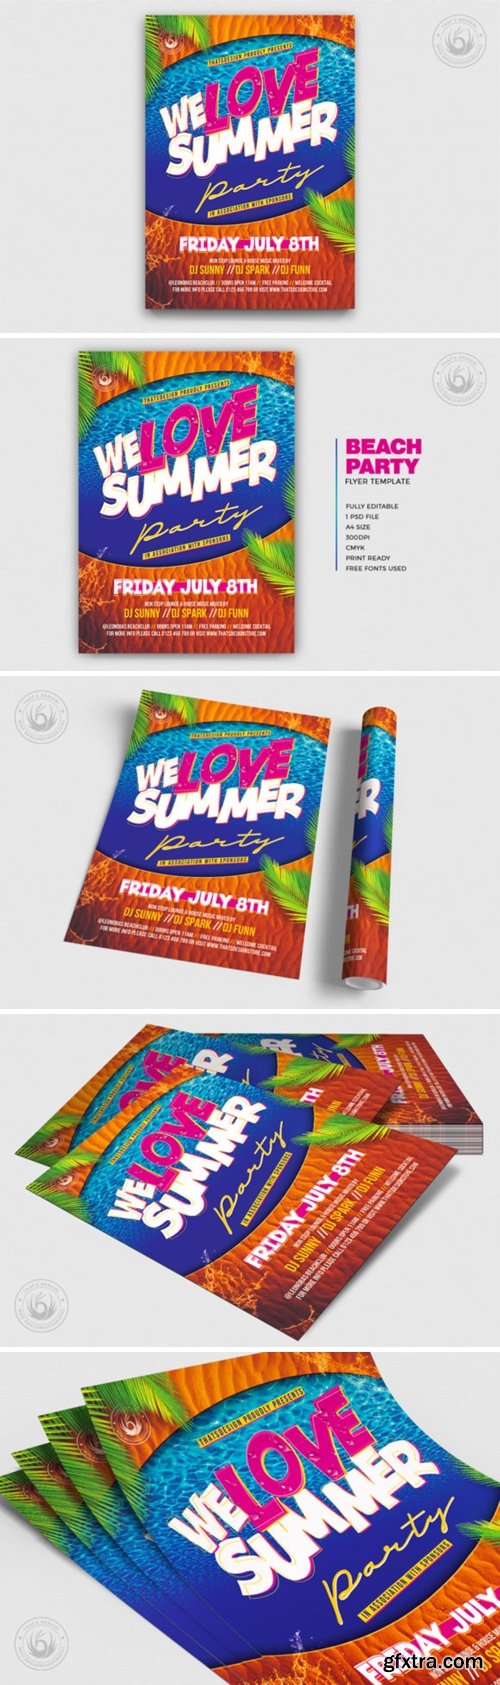 Beach Party Flyer Template V8